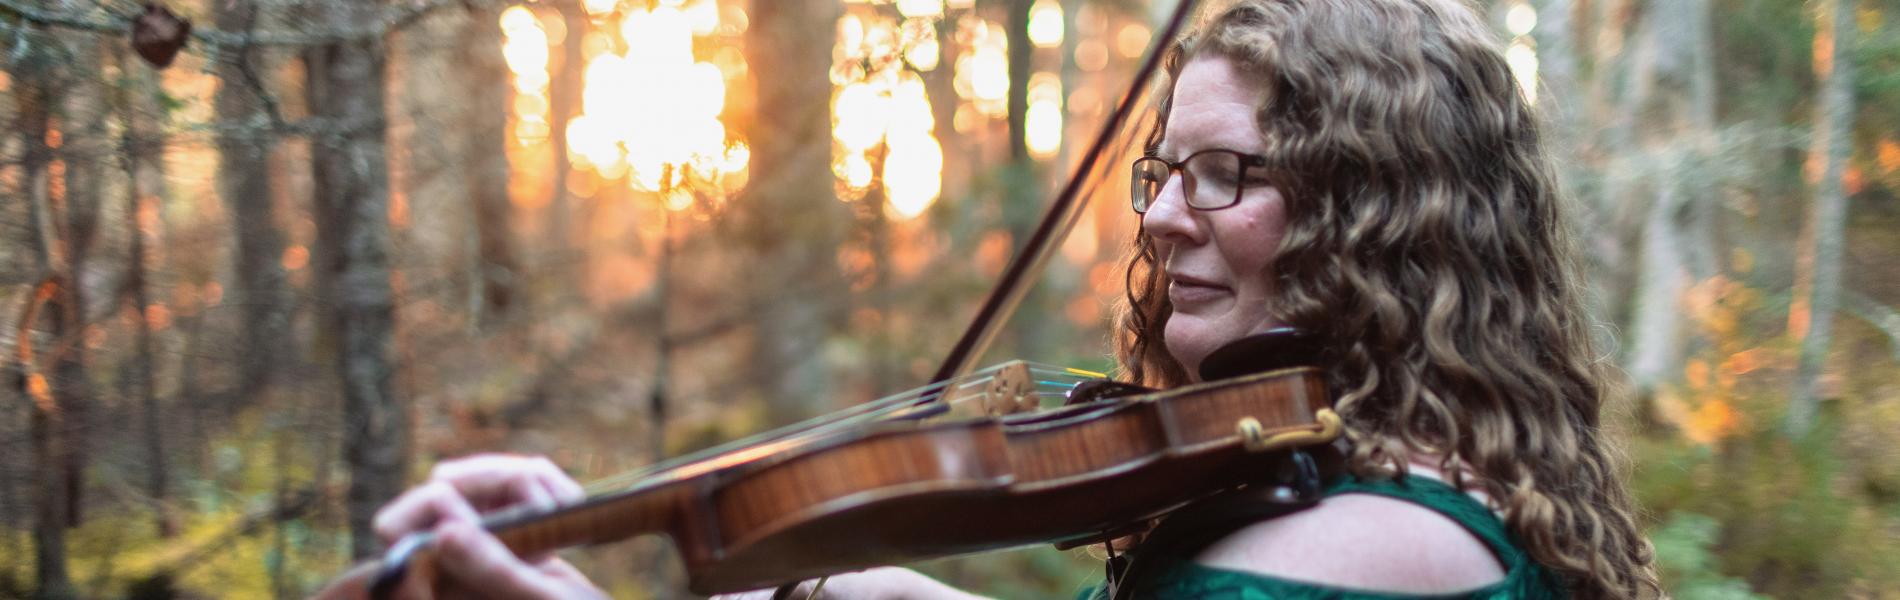 Katherine Moller playing the fiddle outside with trees and a sunset in the background.